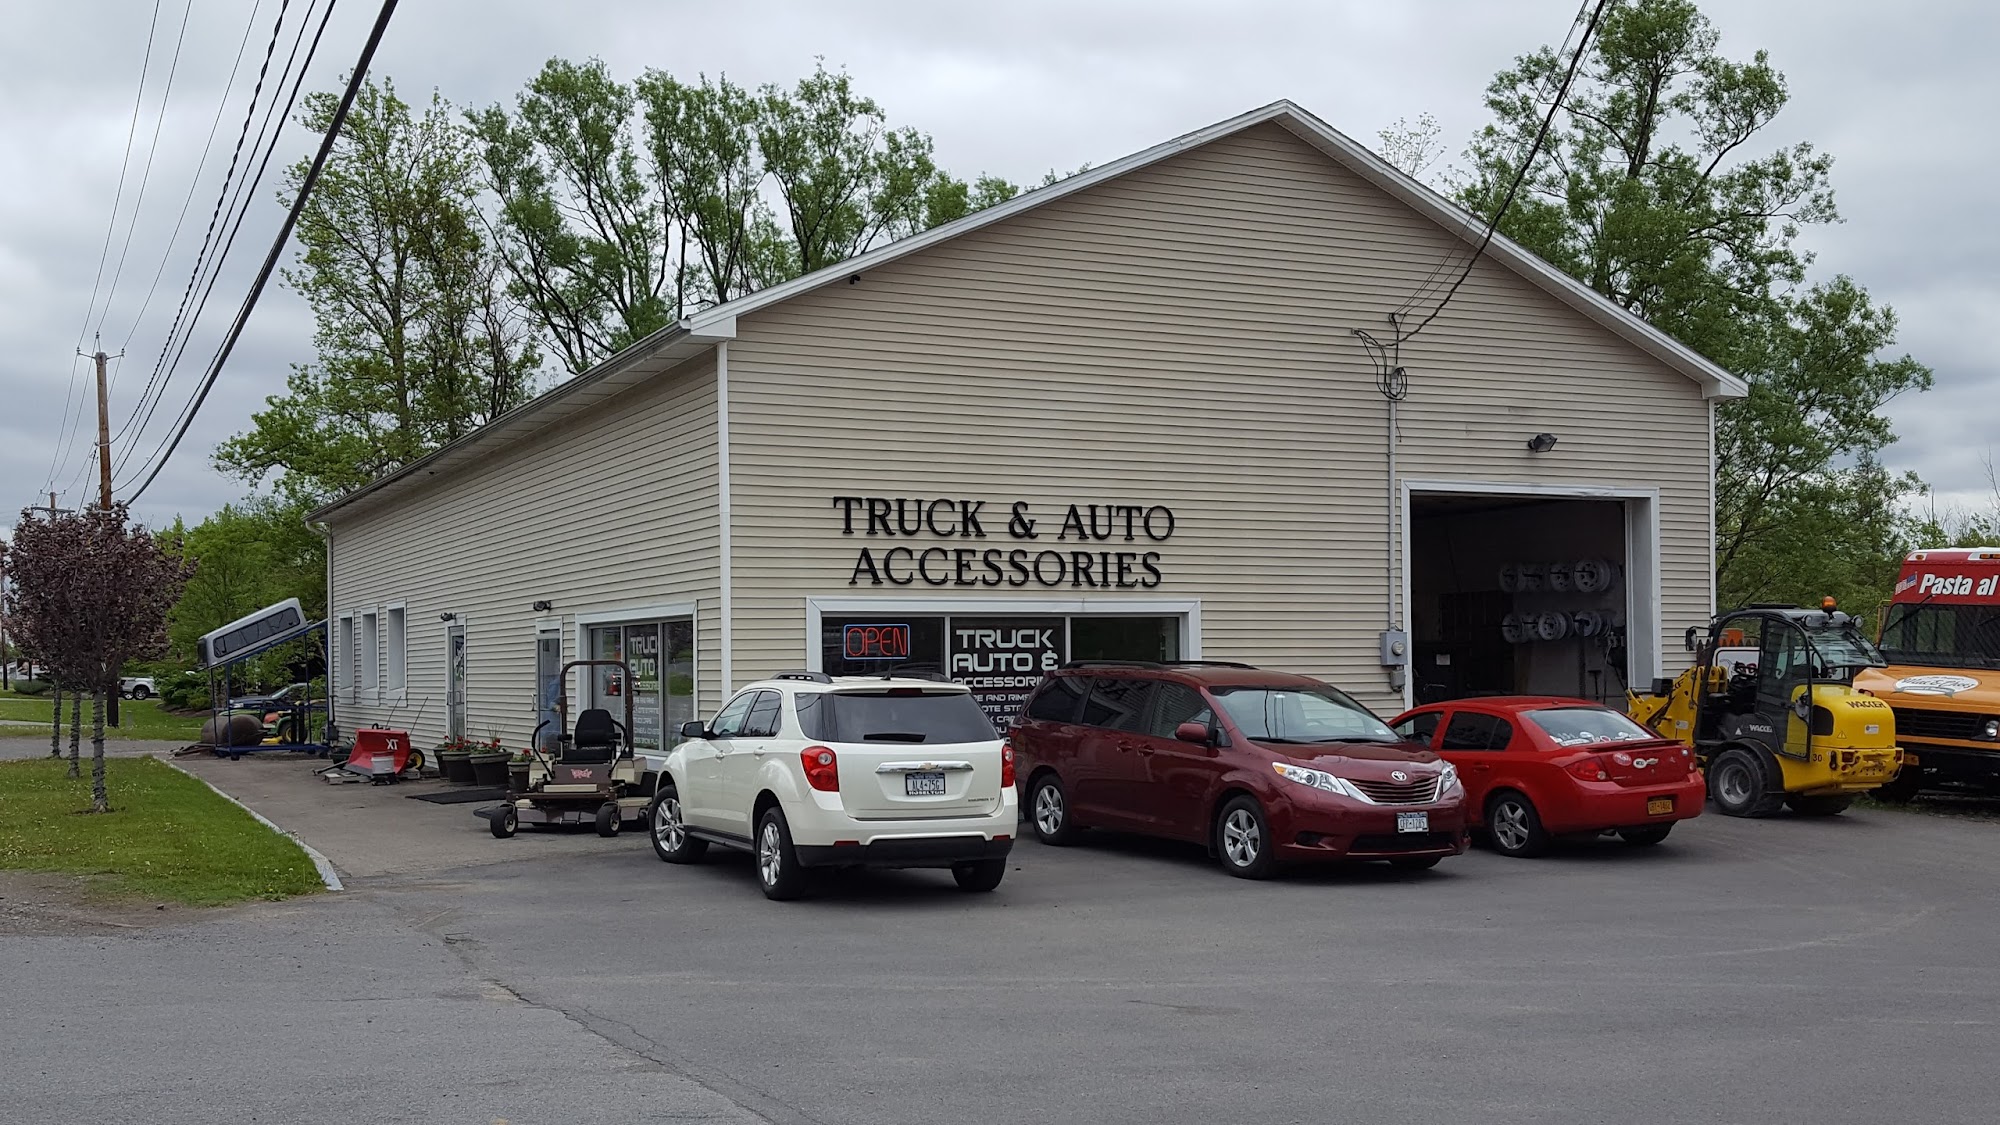 All County Tractor & Trailer Center